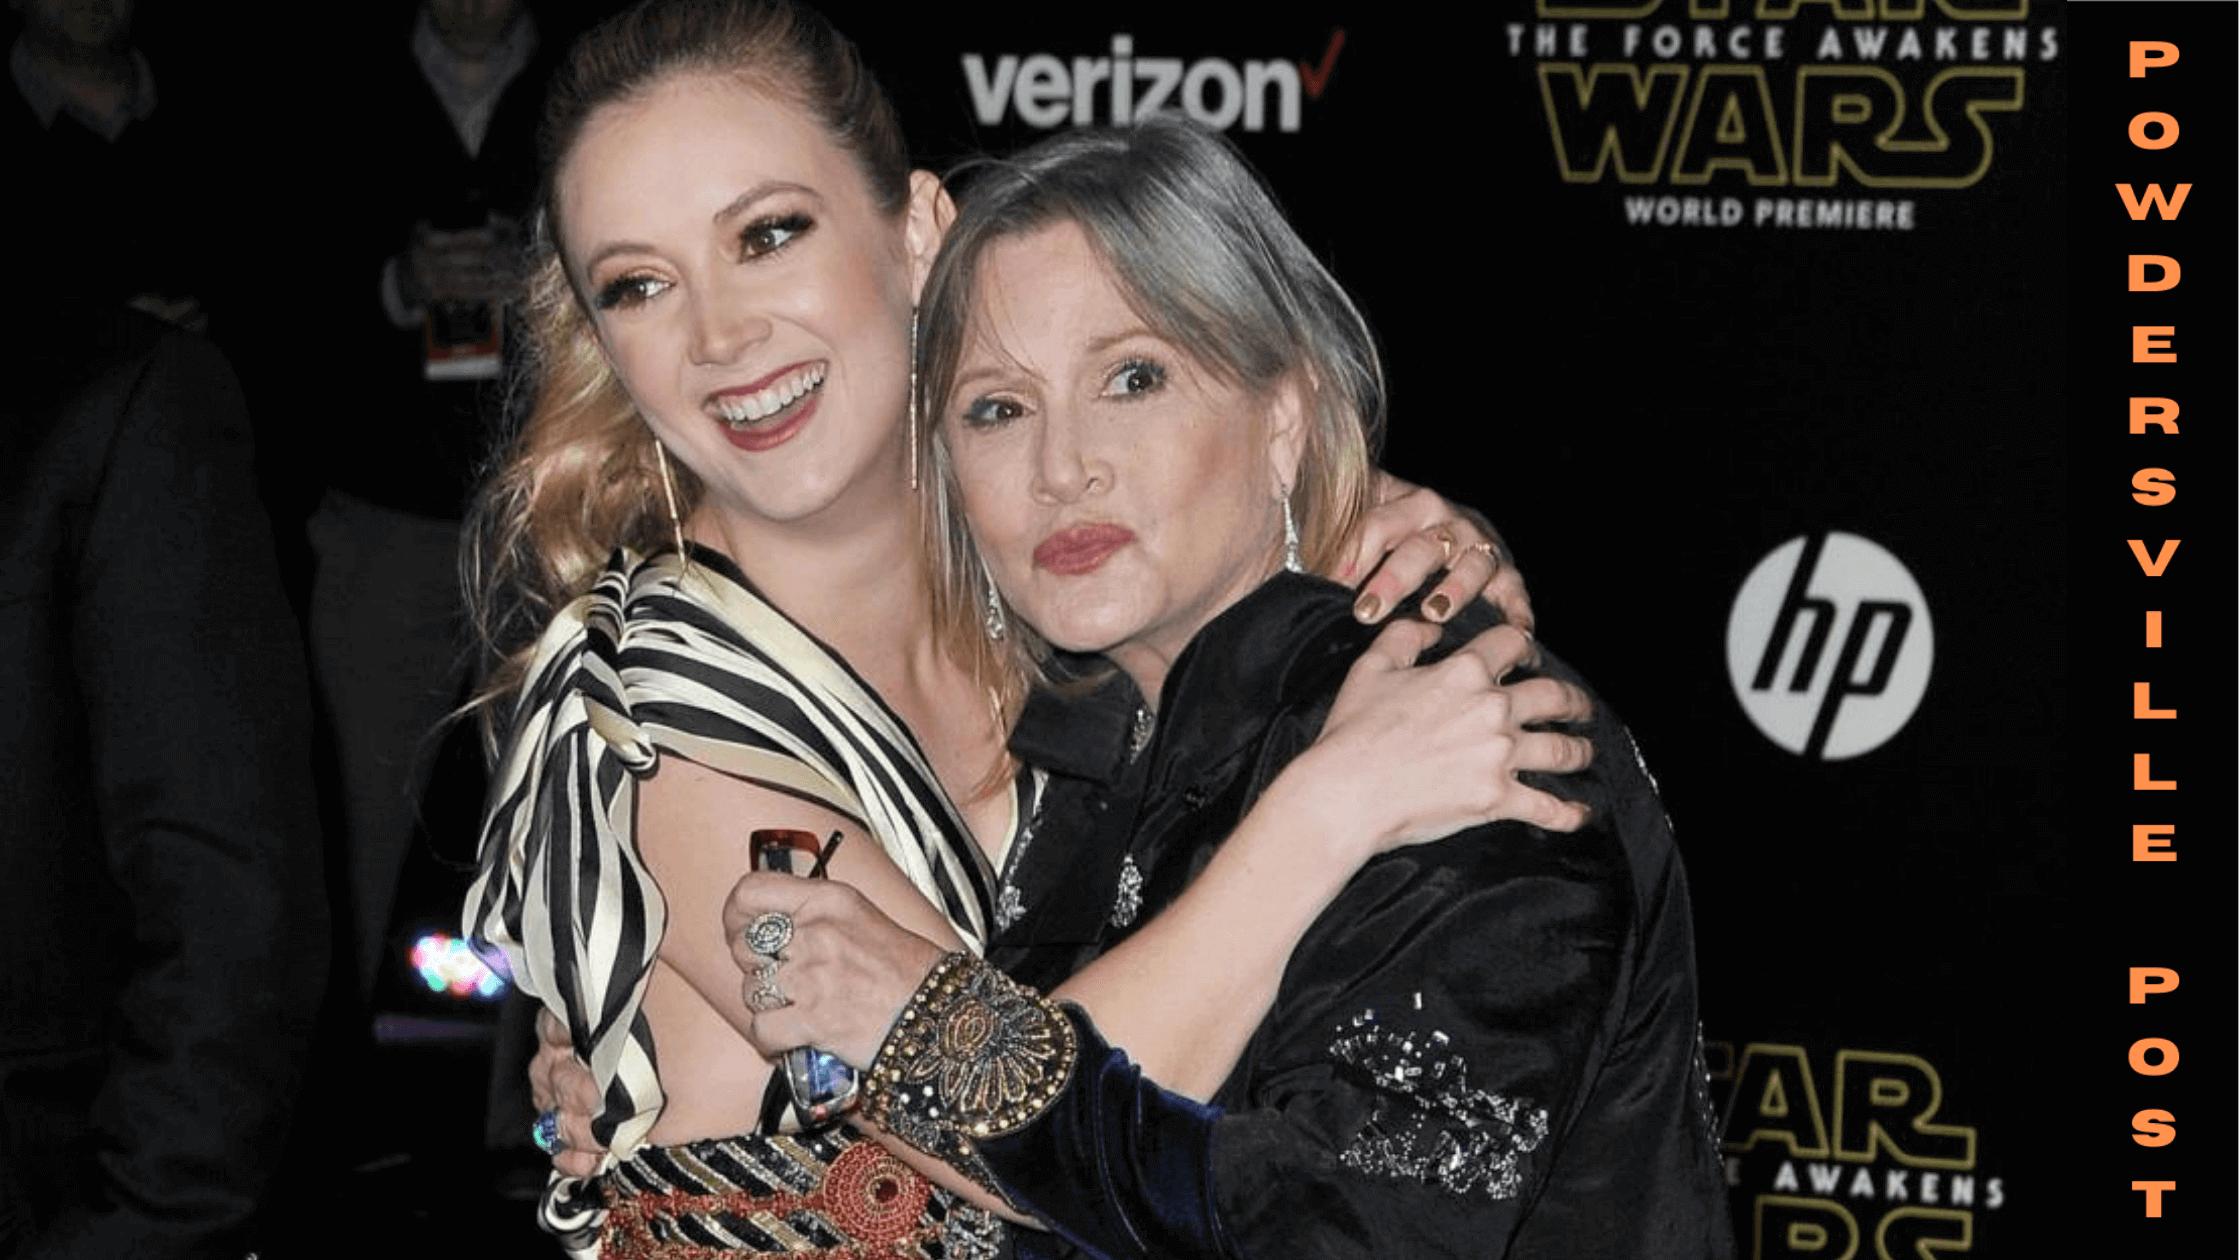 On Mother's Day, Late Carrie Fisher Is Remembered In An emotional Tribute By Daughter Billy Lourd